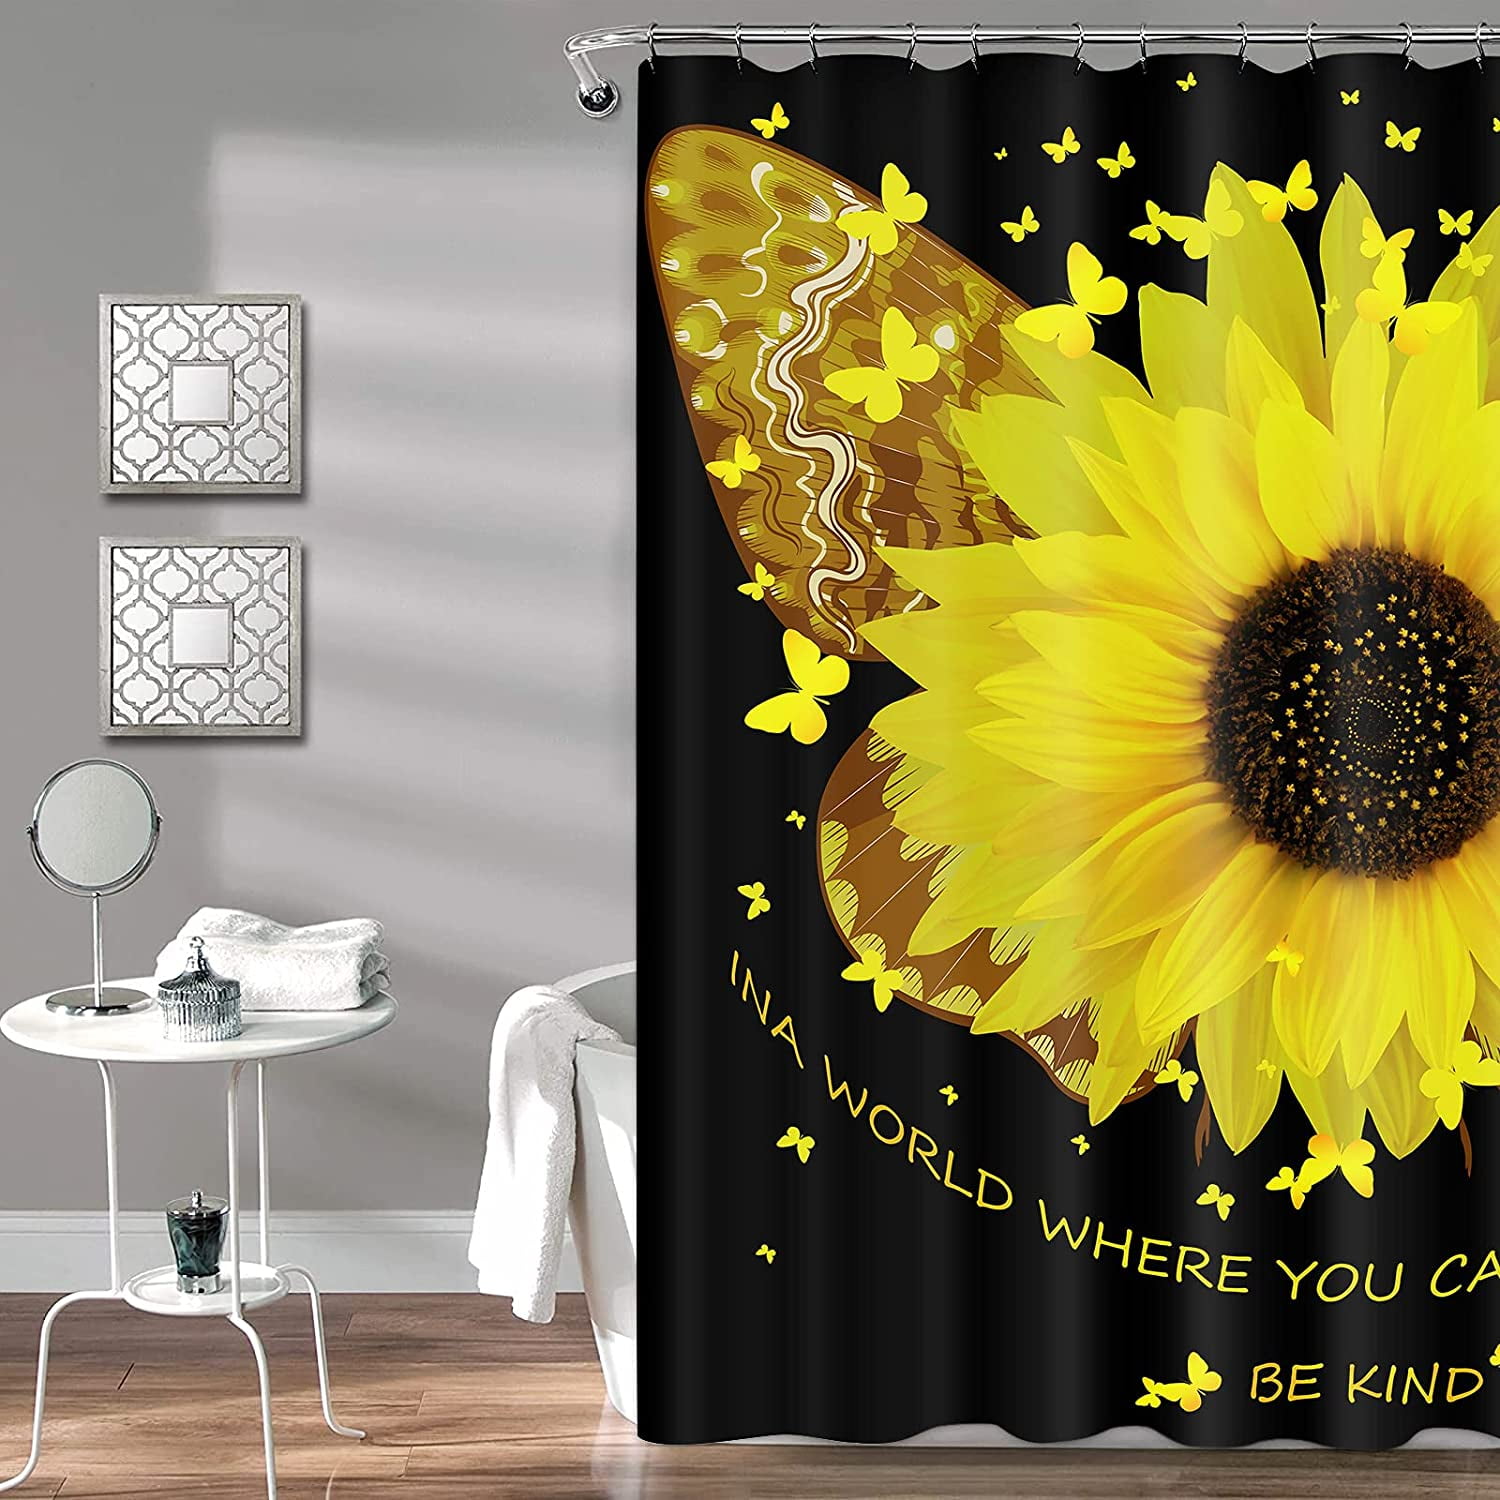 Details about   Farmhouse Country Sunflower on Rural Wood Panel Fabric Shower Curtains & Hooks 